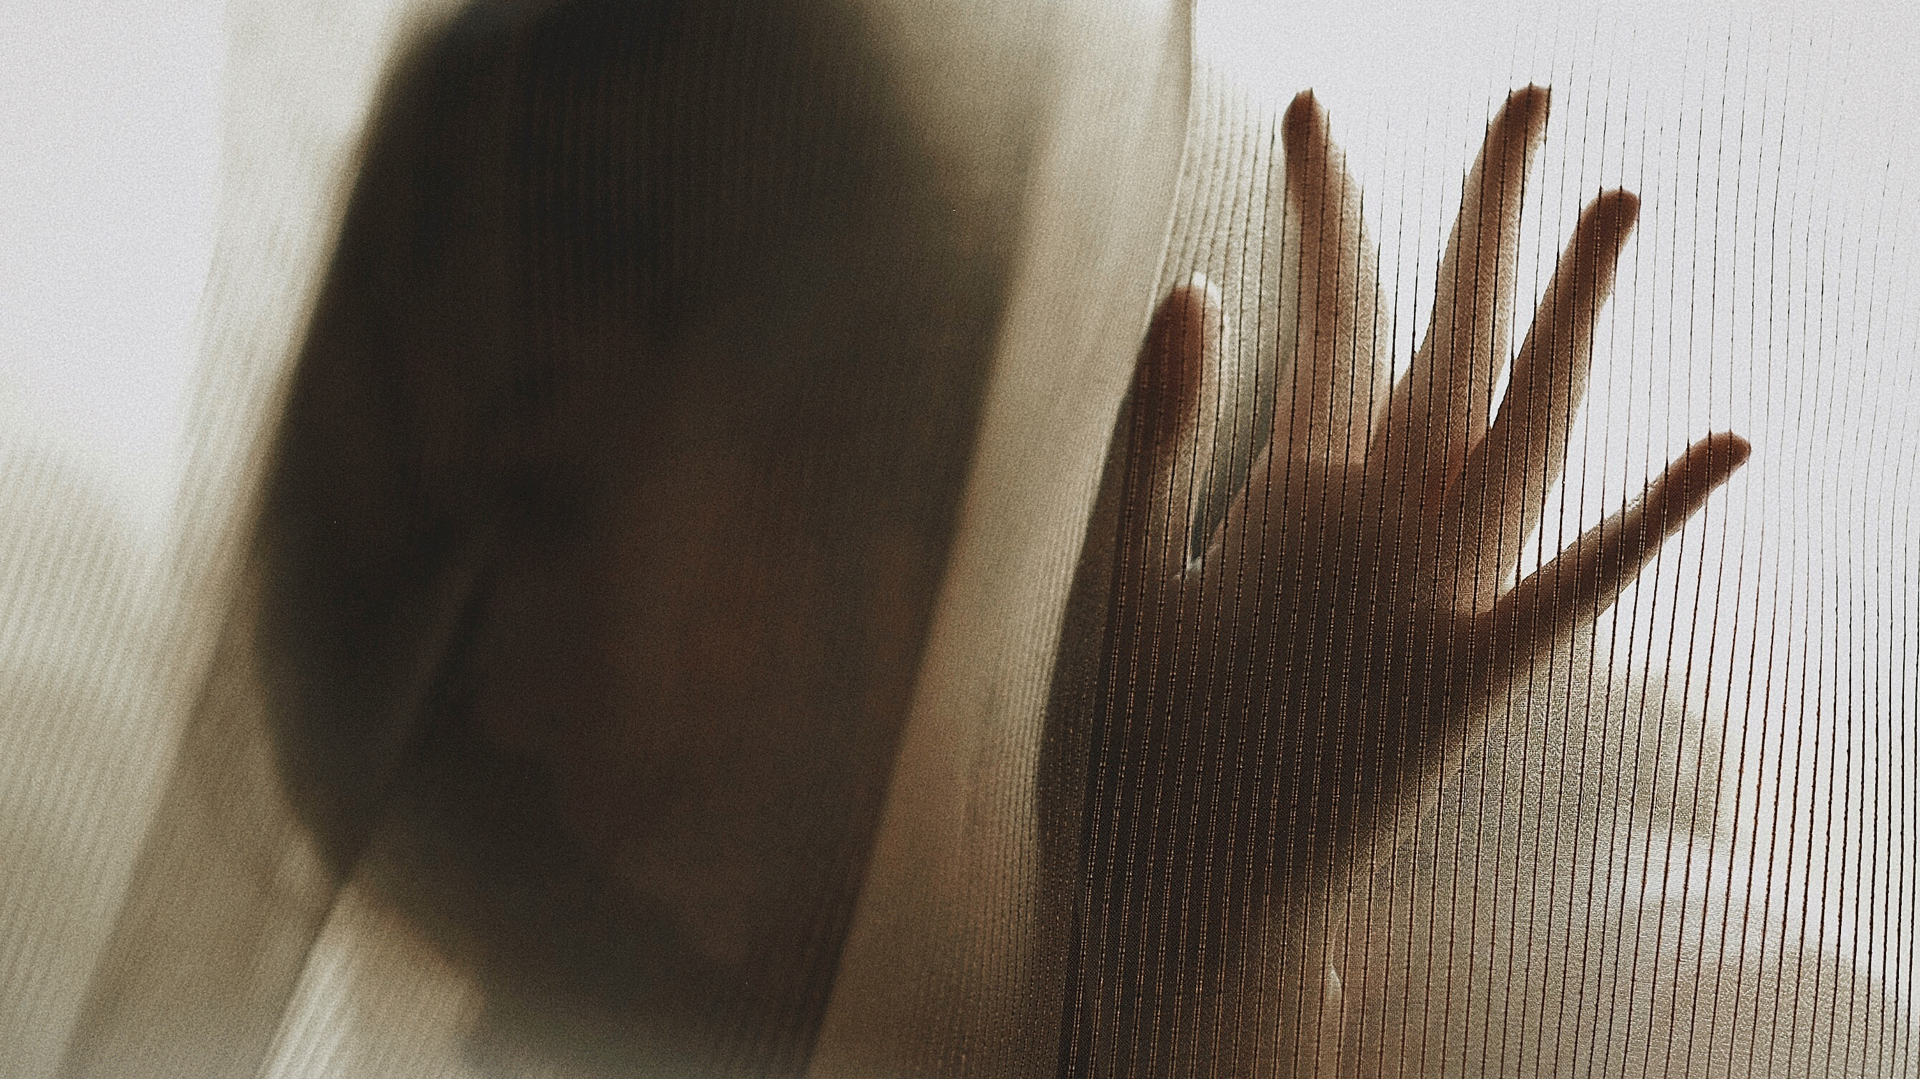 A face and a hand obscured by a curtain